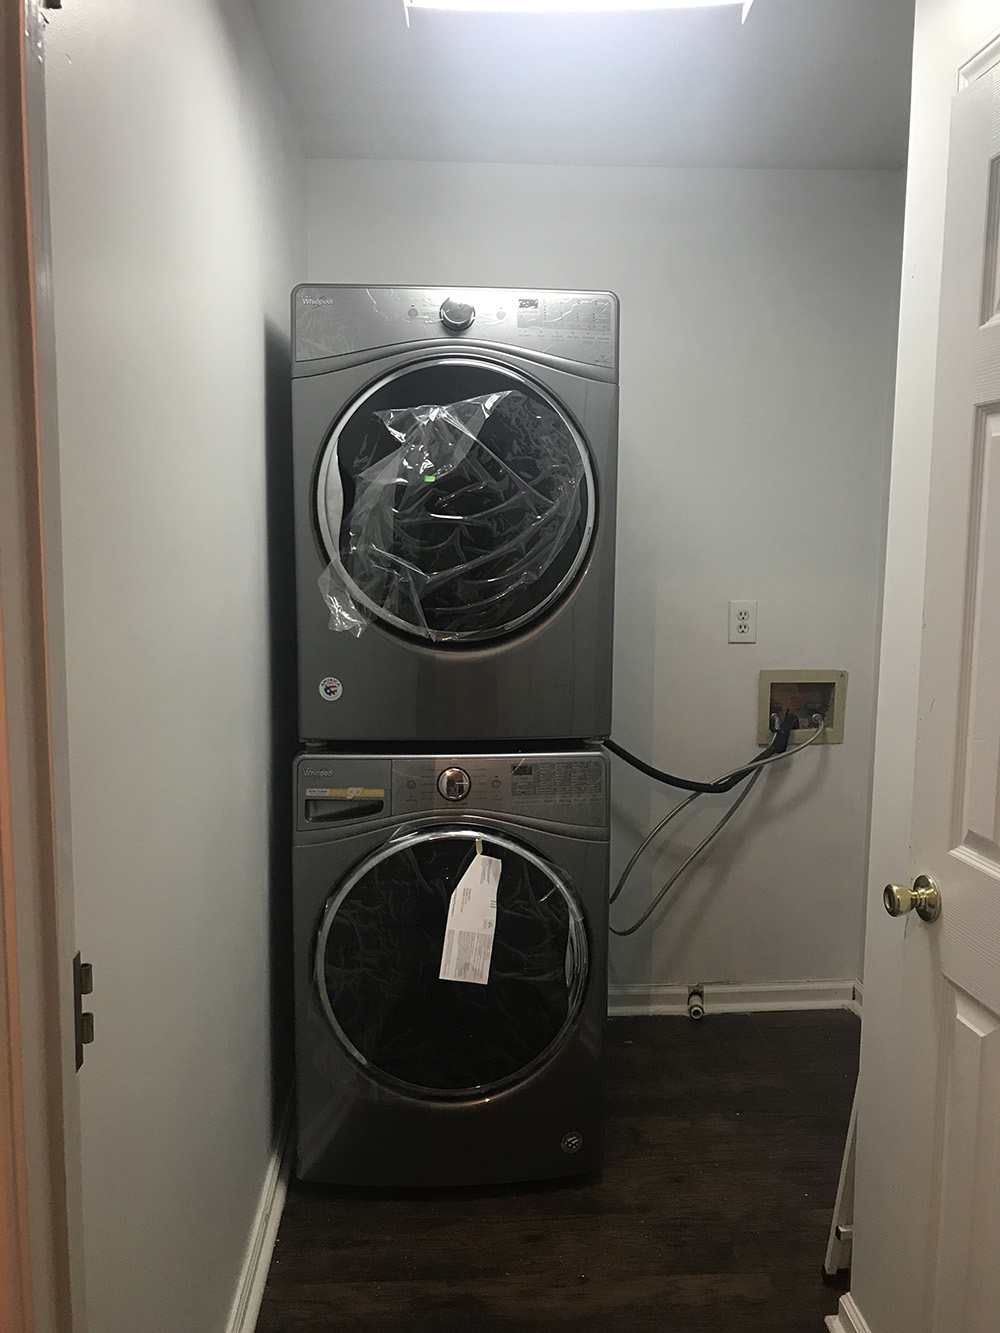 A stacked Whirlpool washer and dryer sit in an empty laundry room.